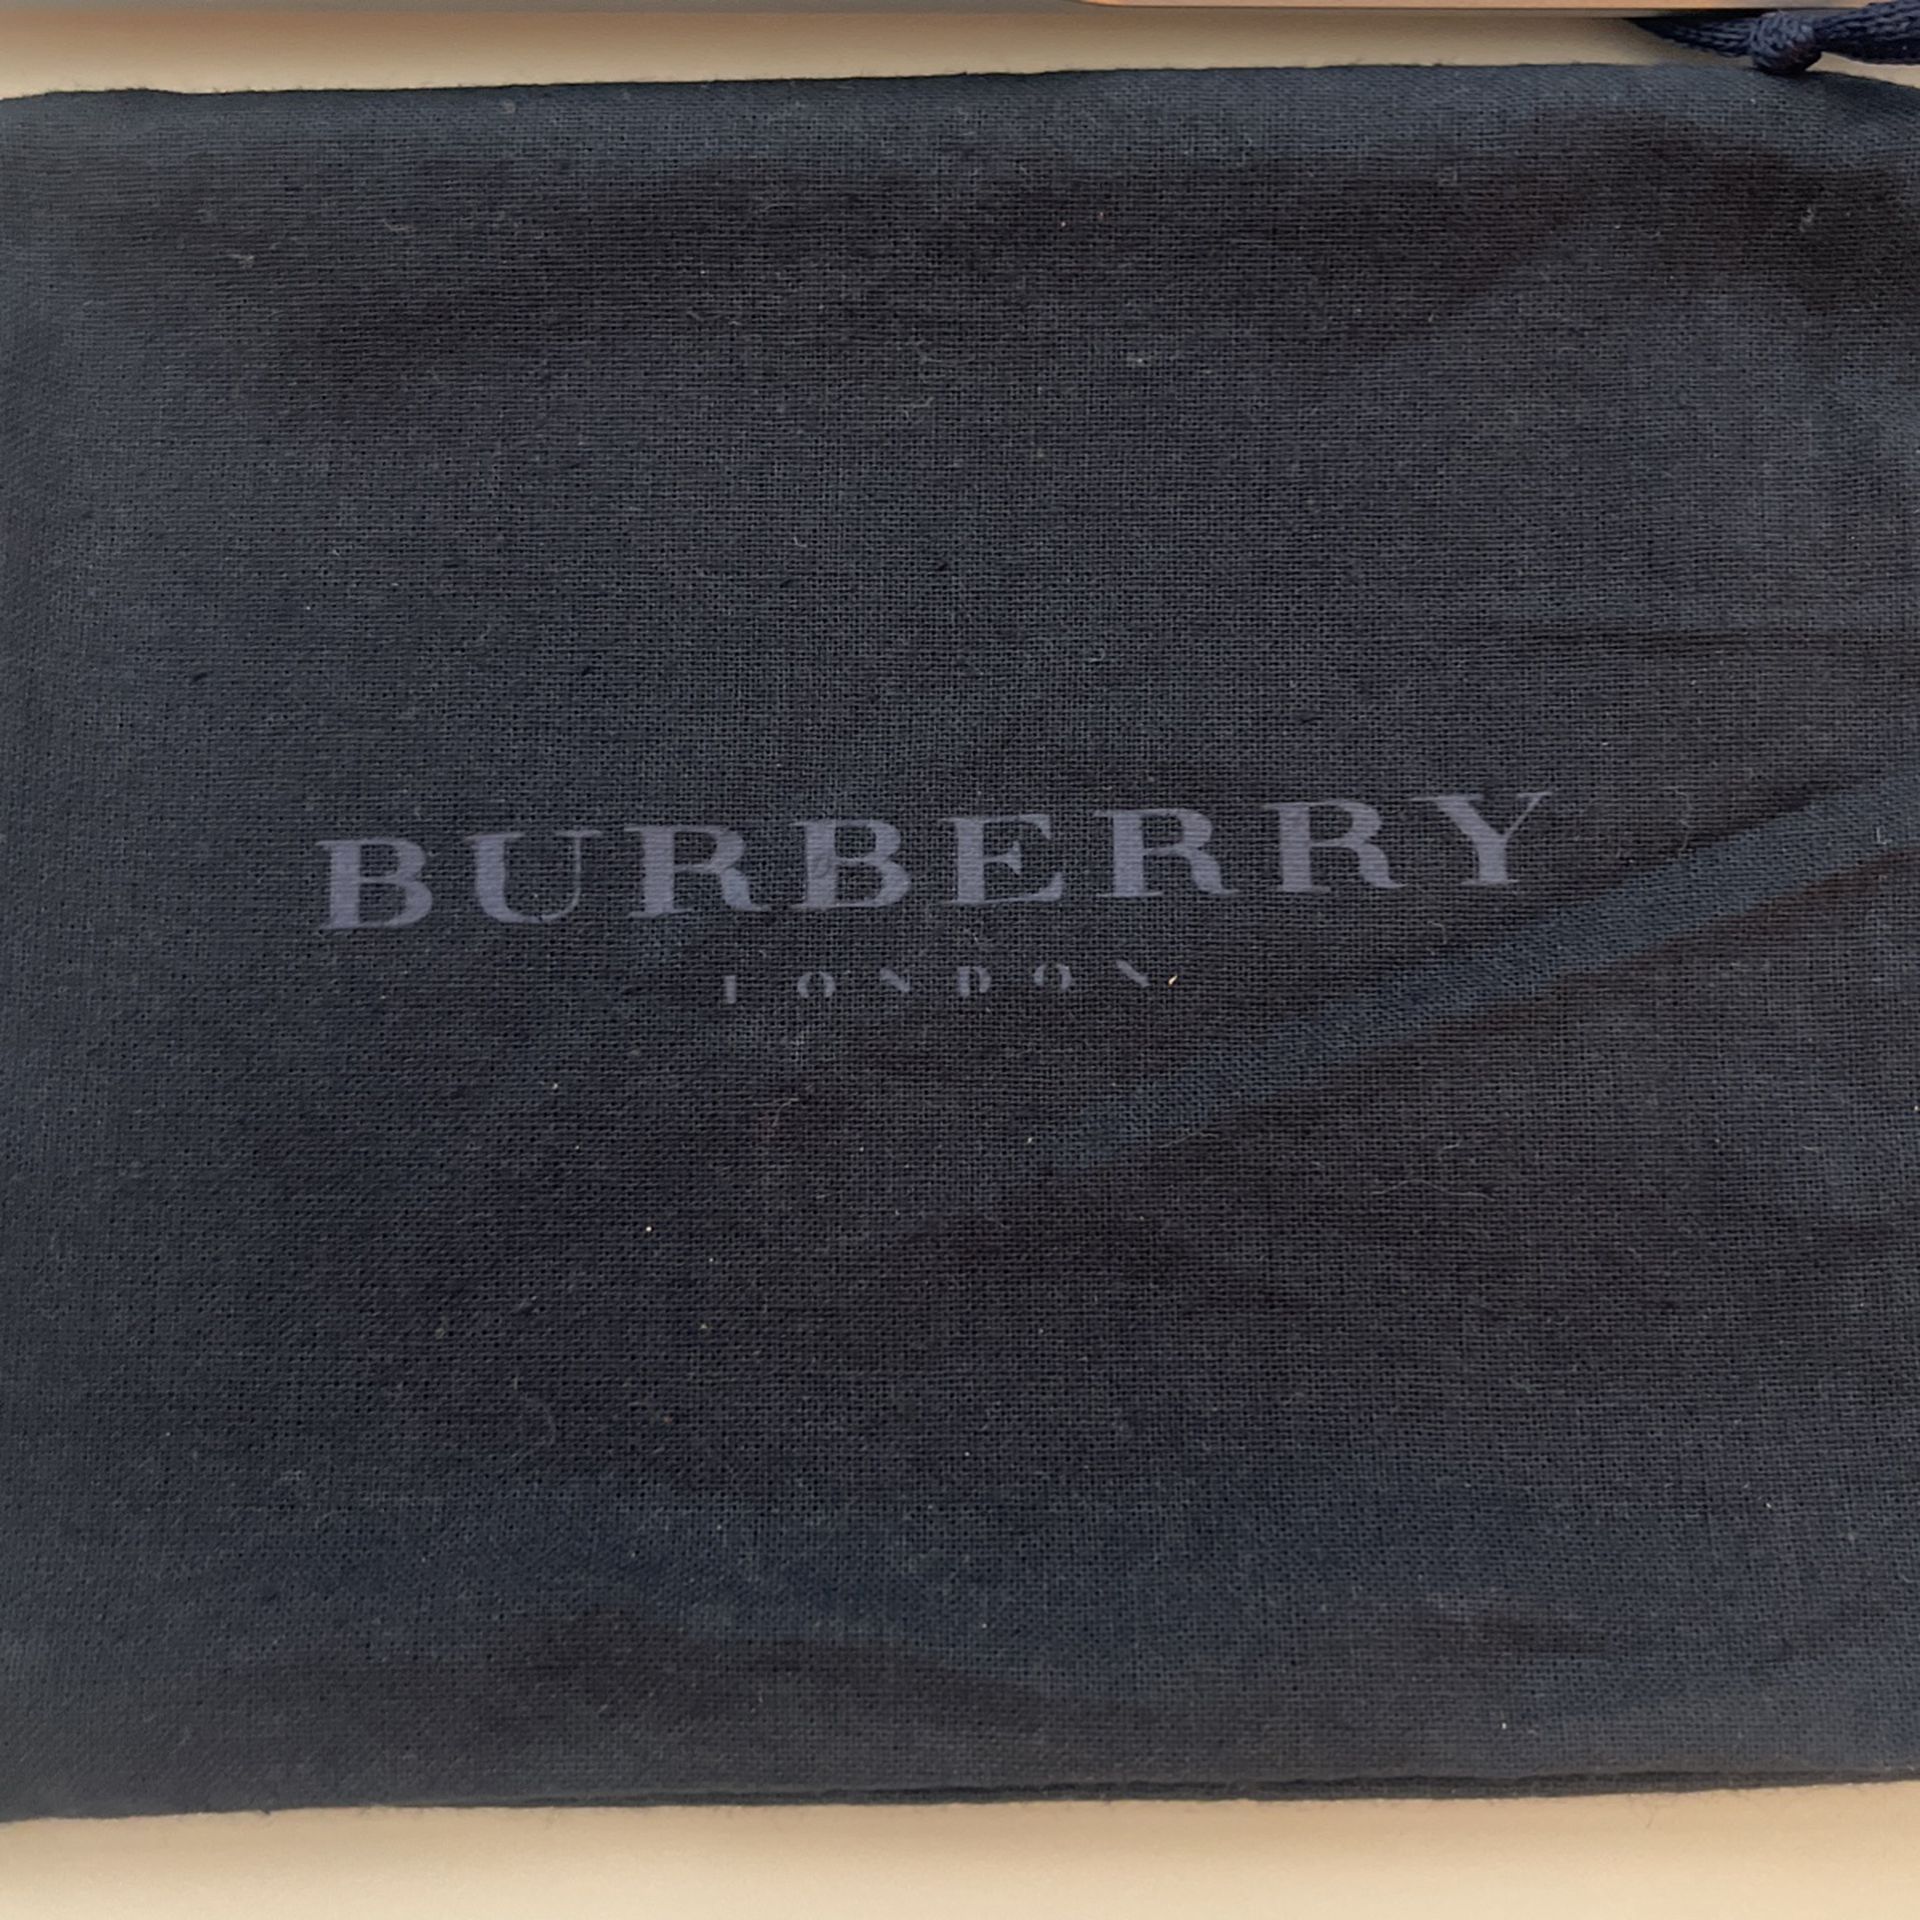 My parents gave me this vintage Burberry wallet with old bills. Thoughts on  where I can exchange them? : r/CURRENCY